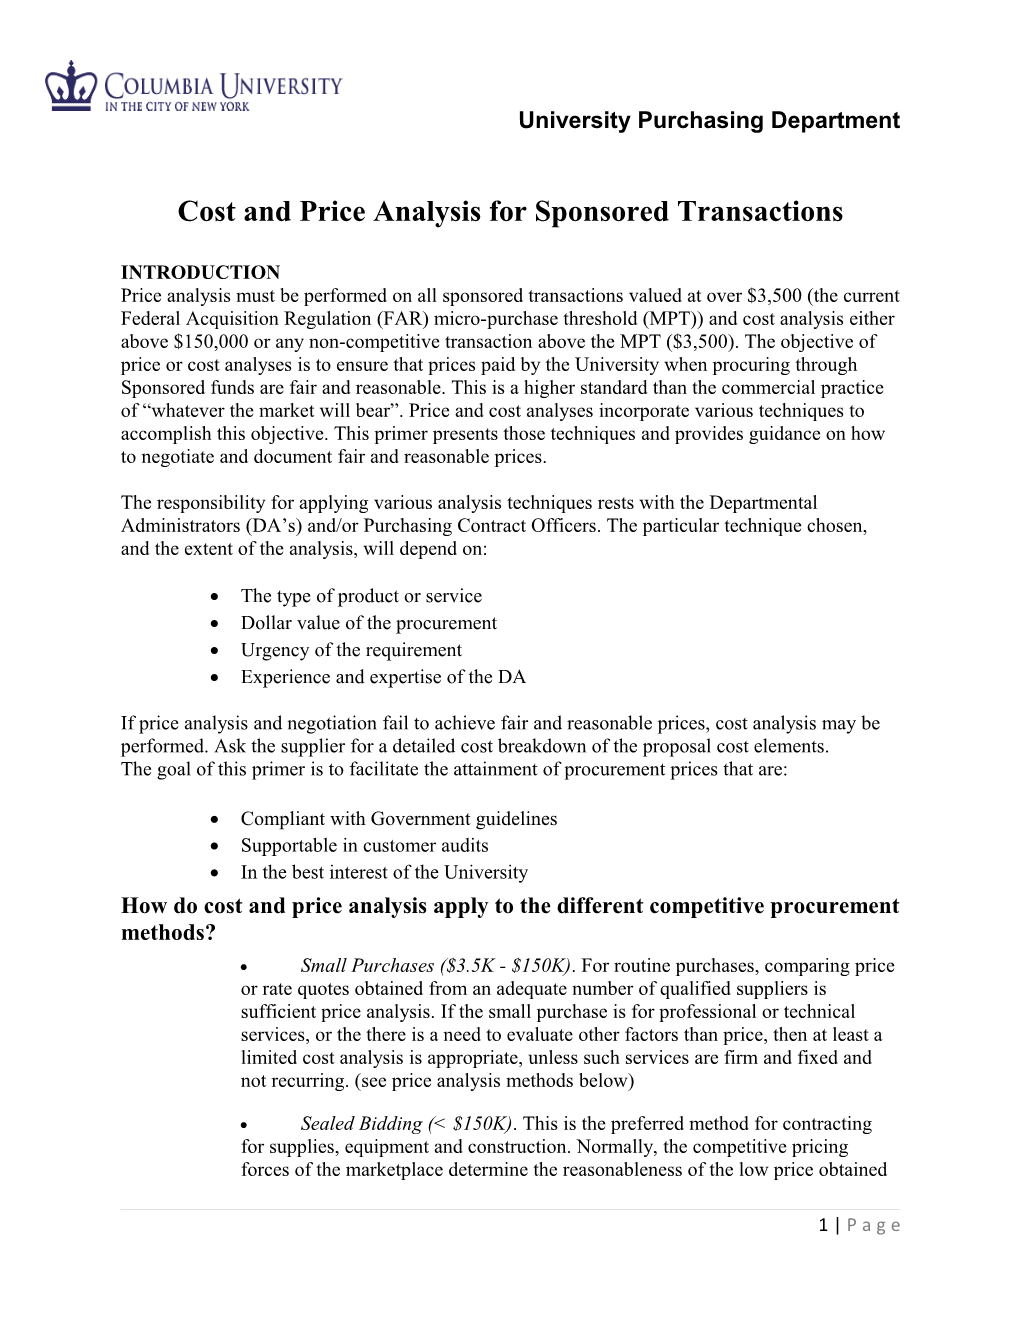 Cost and Price Analysis for Sponsored Transactions